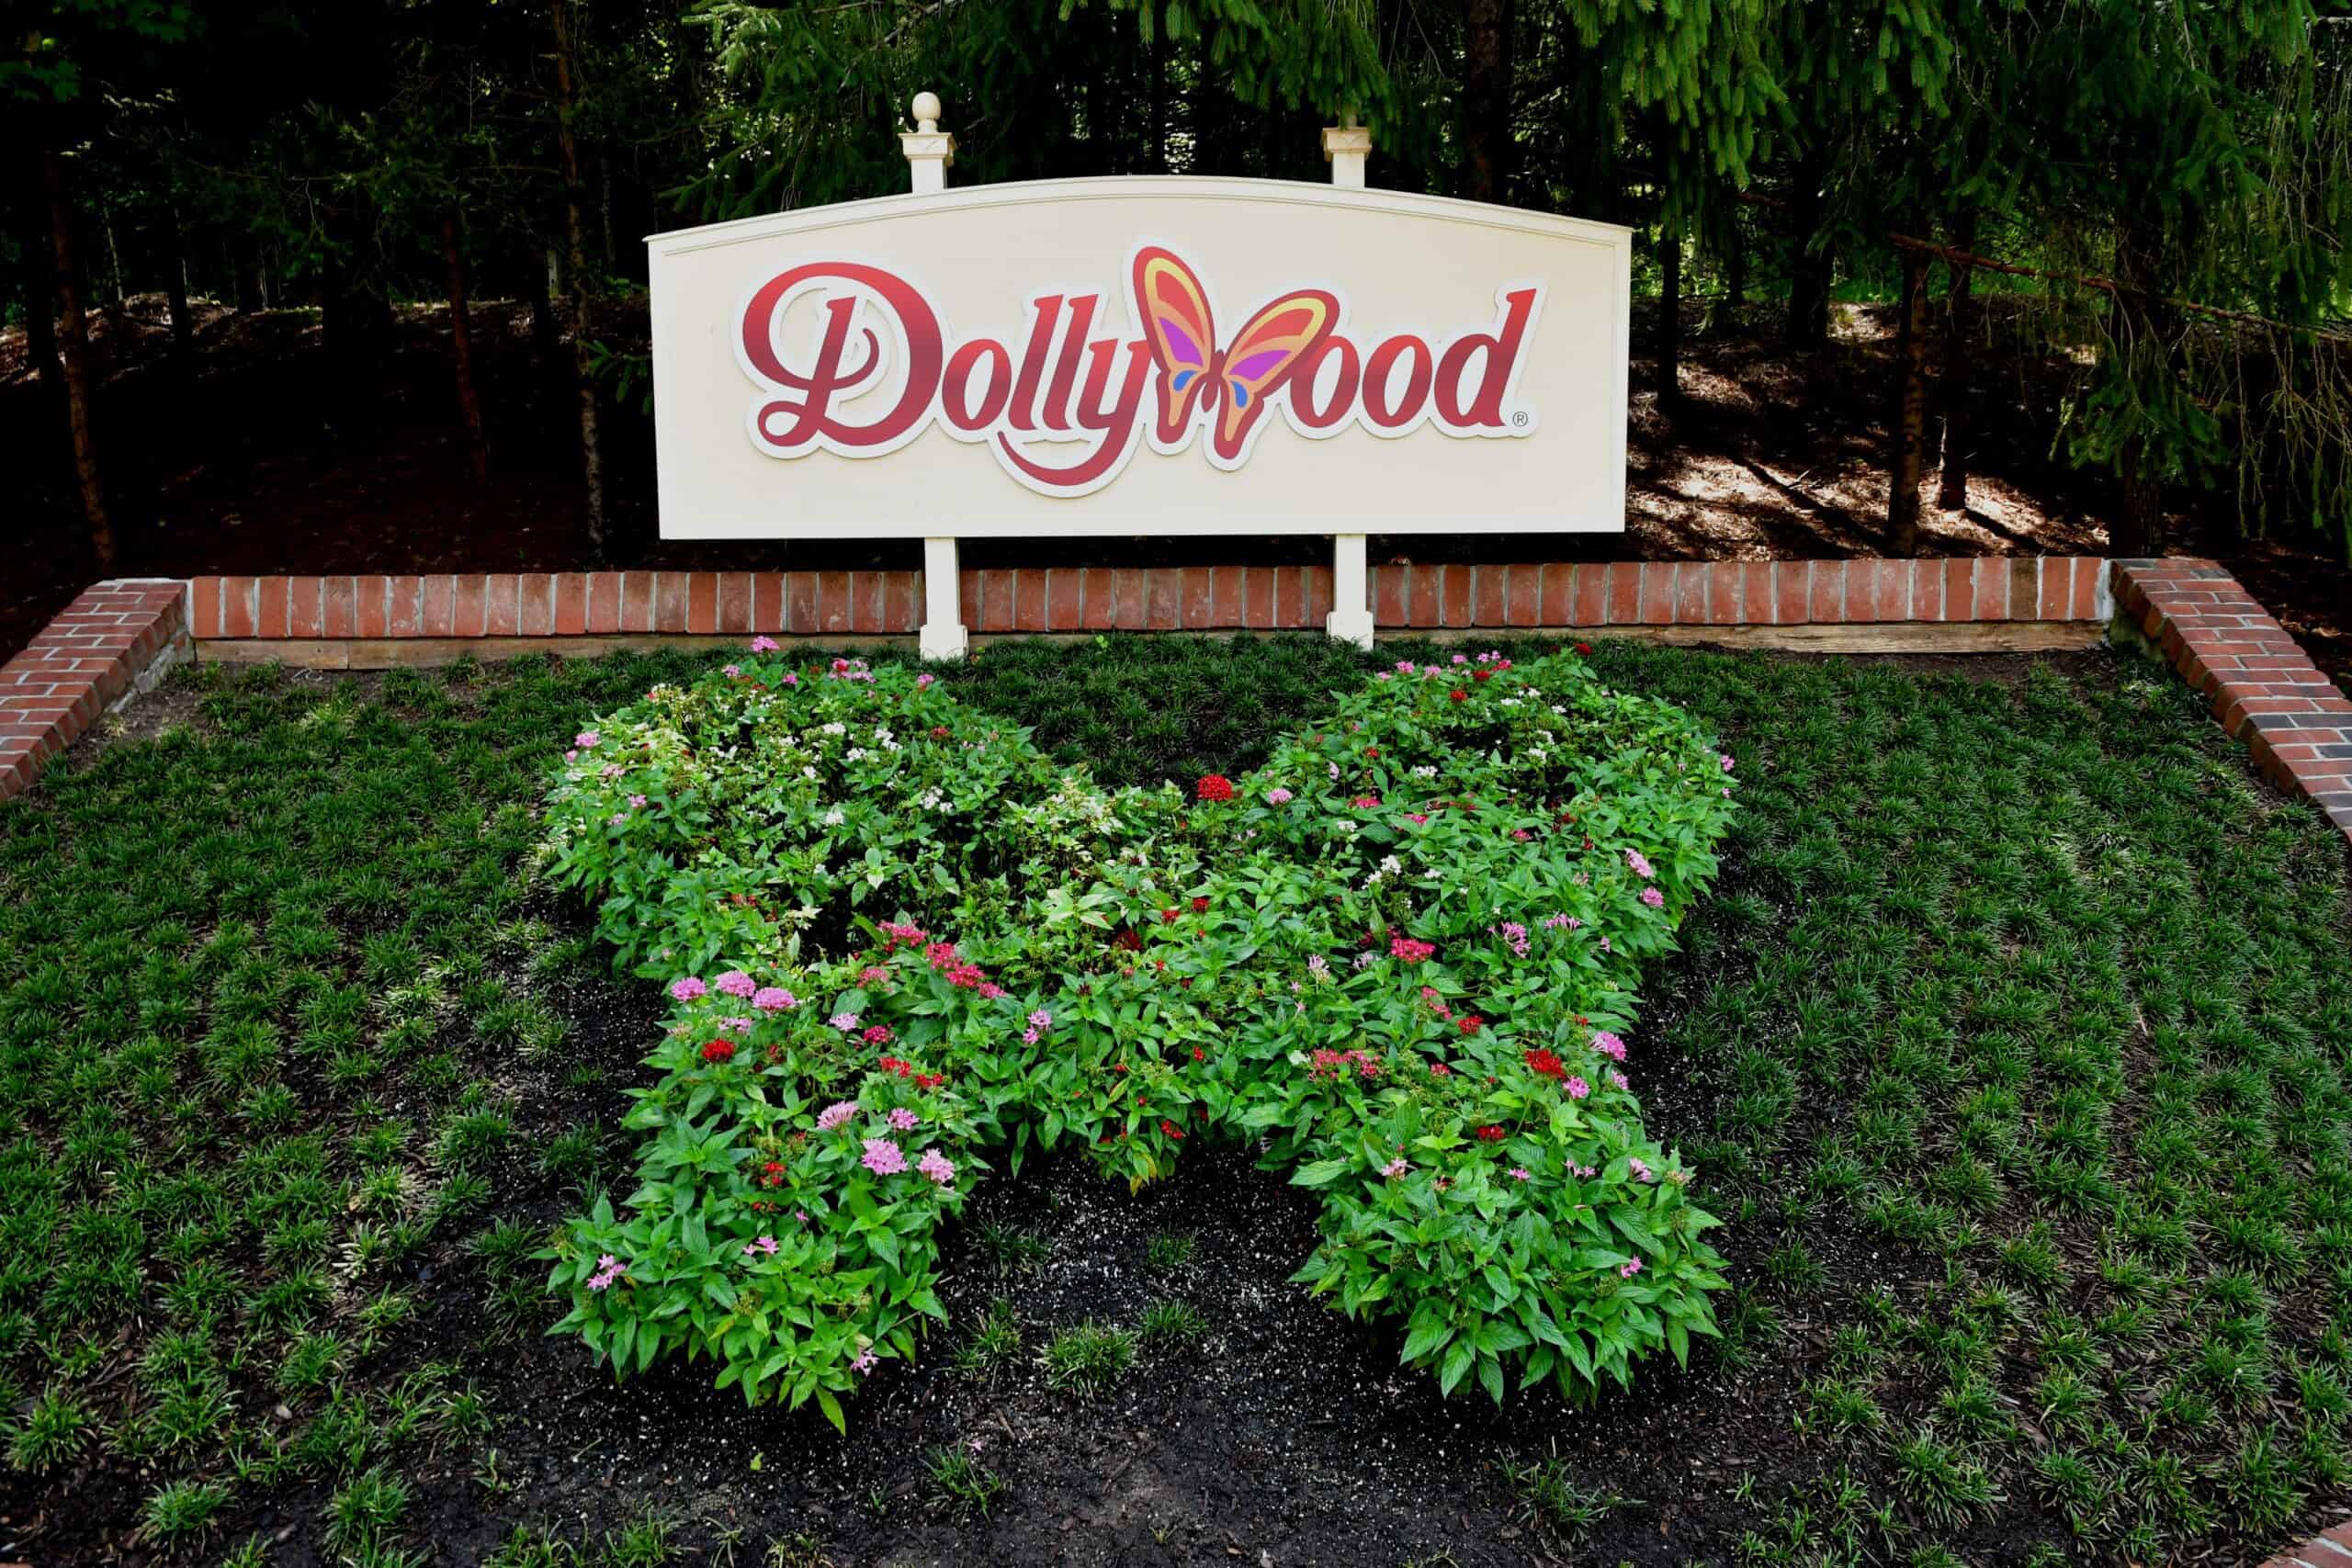 A beautiful garden display welcomes guests to Dollywood